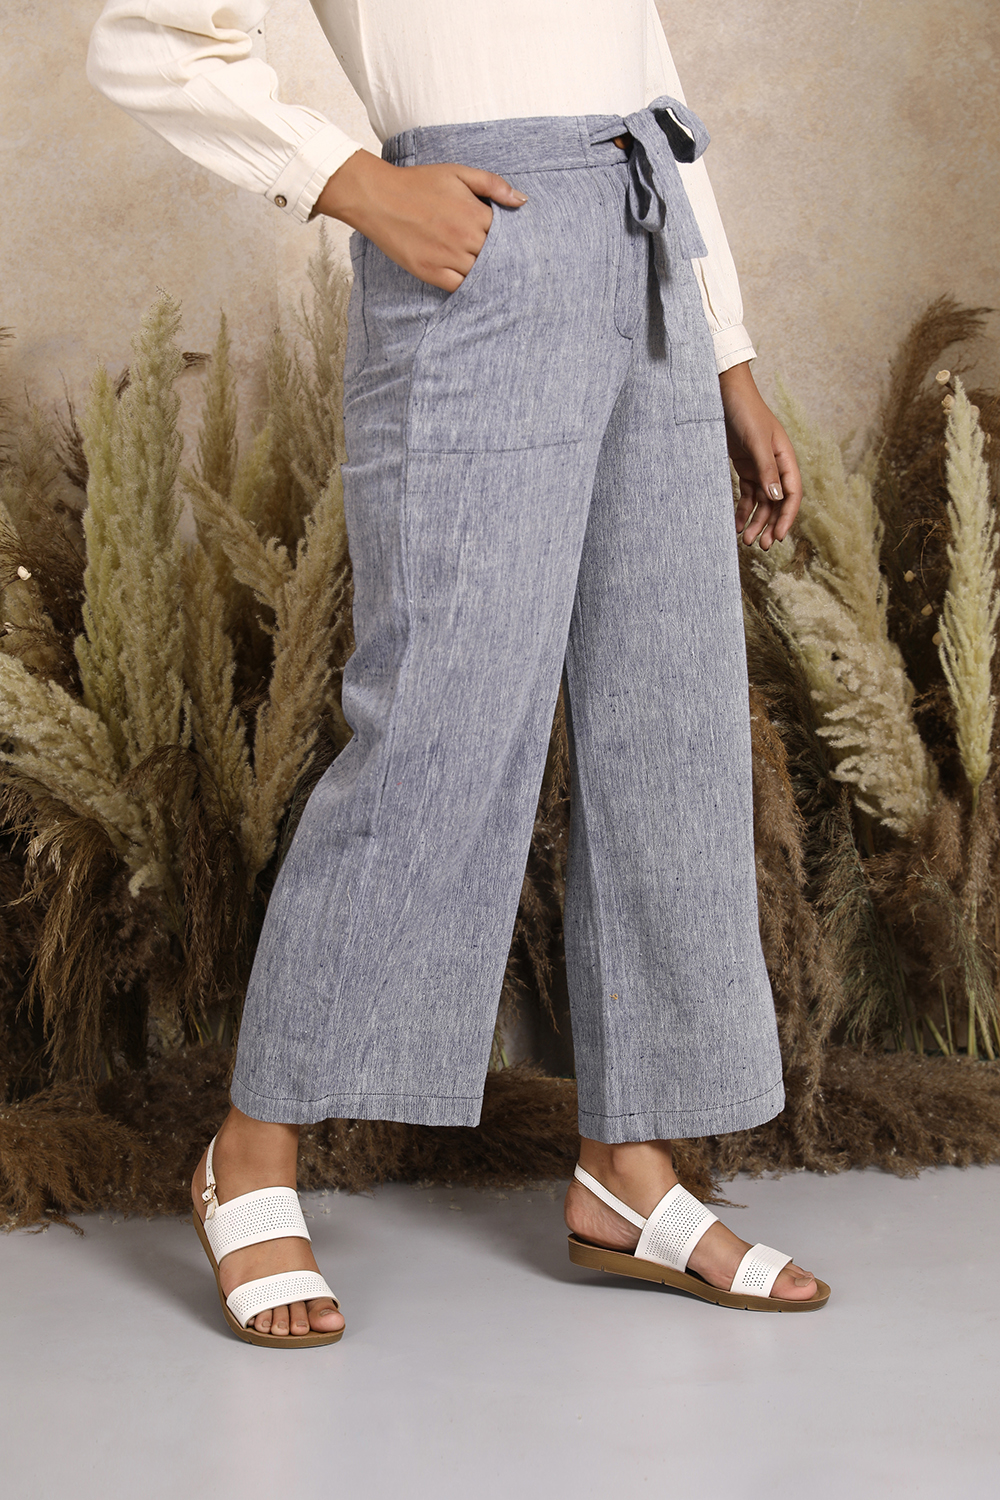 Handwoven Kala Cotton Tie-up Waist Wideleg Pants in Blue. Women's ankle length cotton pants by Vegan clothing brands India